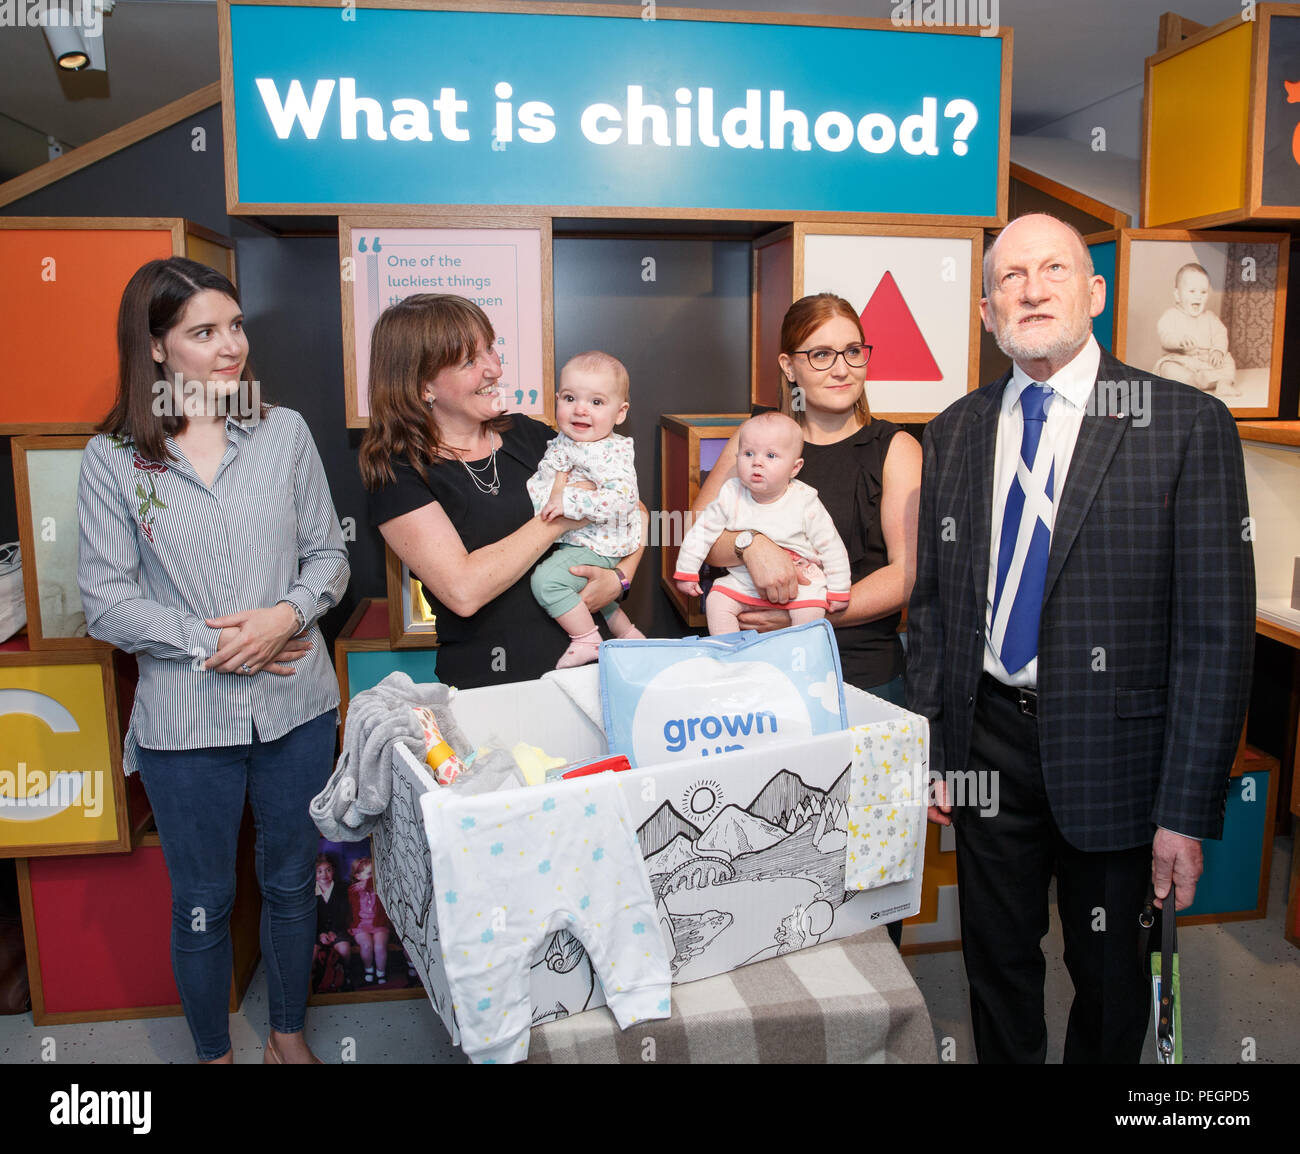 Maree Todd (second left), Minister for Children and Young People, with (left to right) Sarah Morrison and daughter Chrissie, Gillian Steele with daughter Erin and Councillor Derek Howie, marks the first anniversary of the Baby Box initiative at the Museum of Childhood, as one of the boxes is to be preserved in history as an exhibit at the Edinburgh attraction. Stock Photo